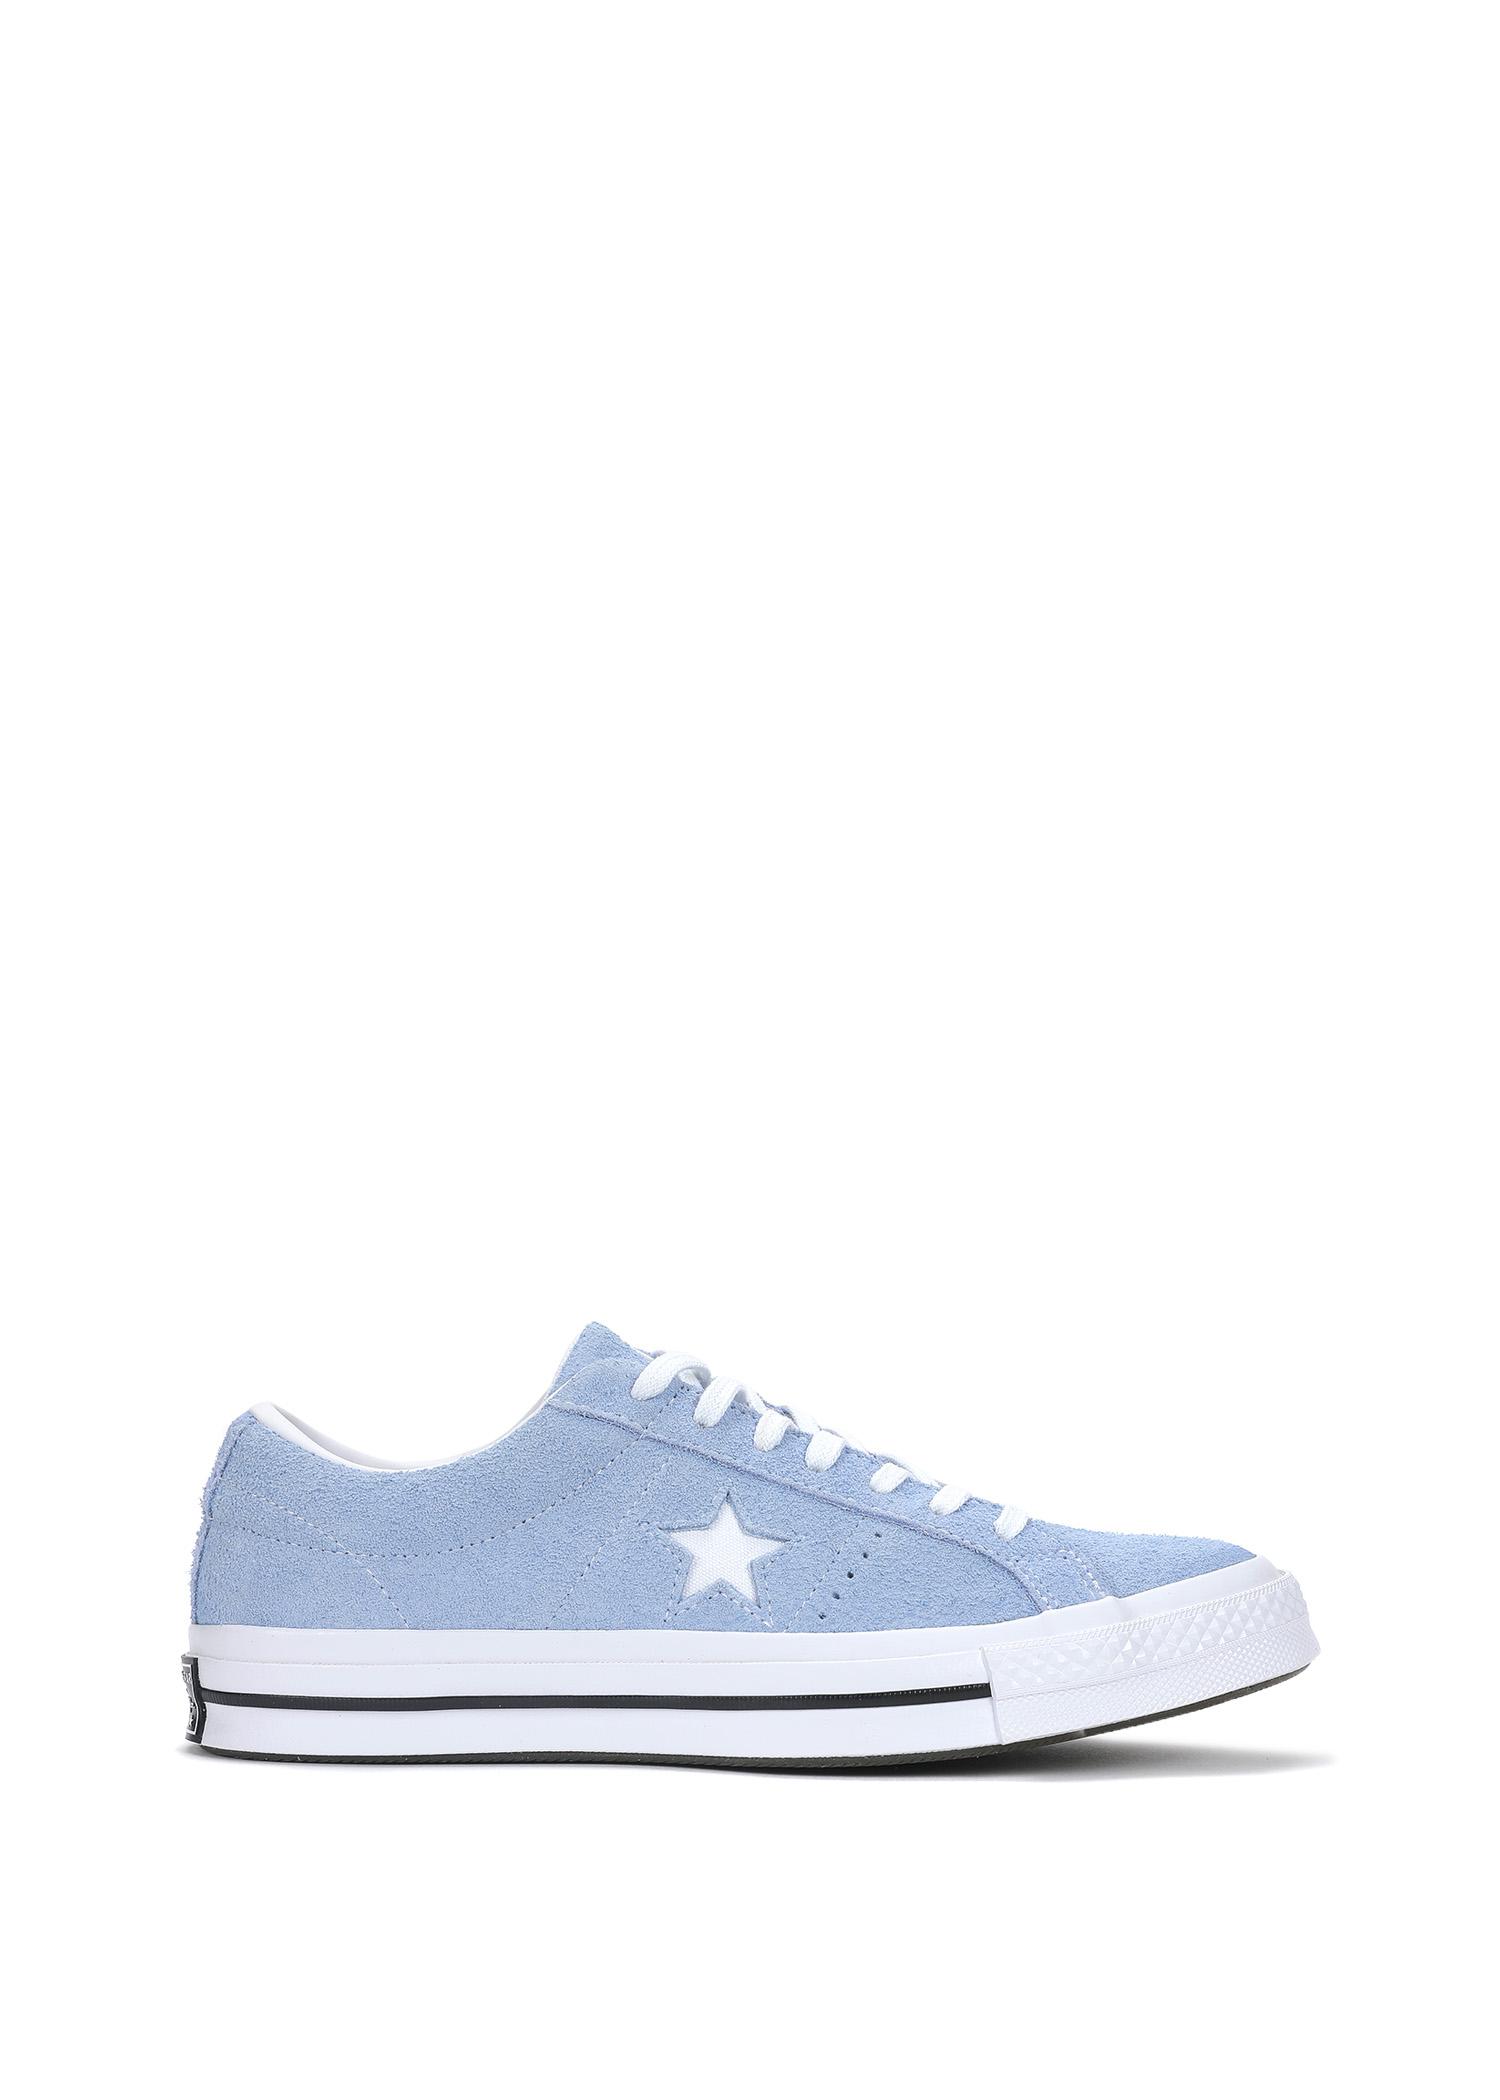 Converse One Star Ox In Sky Blue | ModeSens